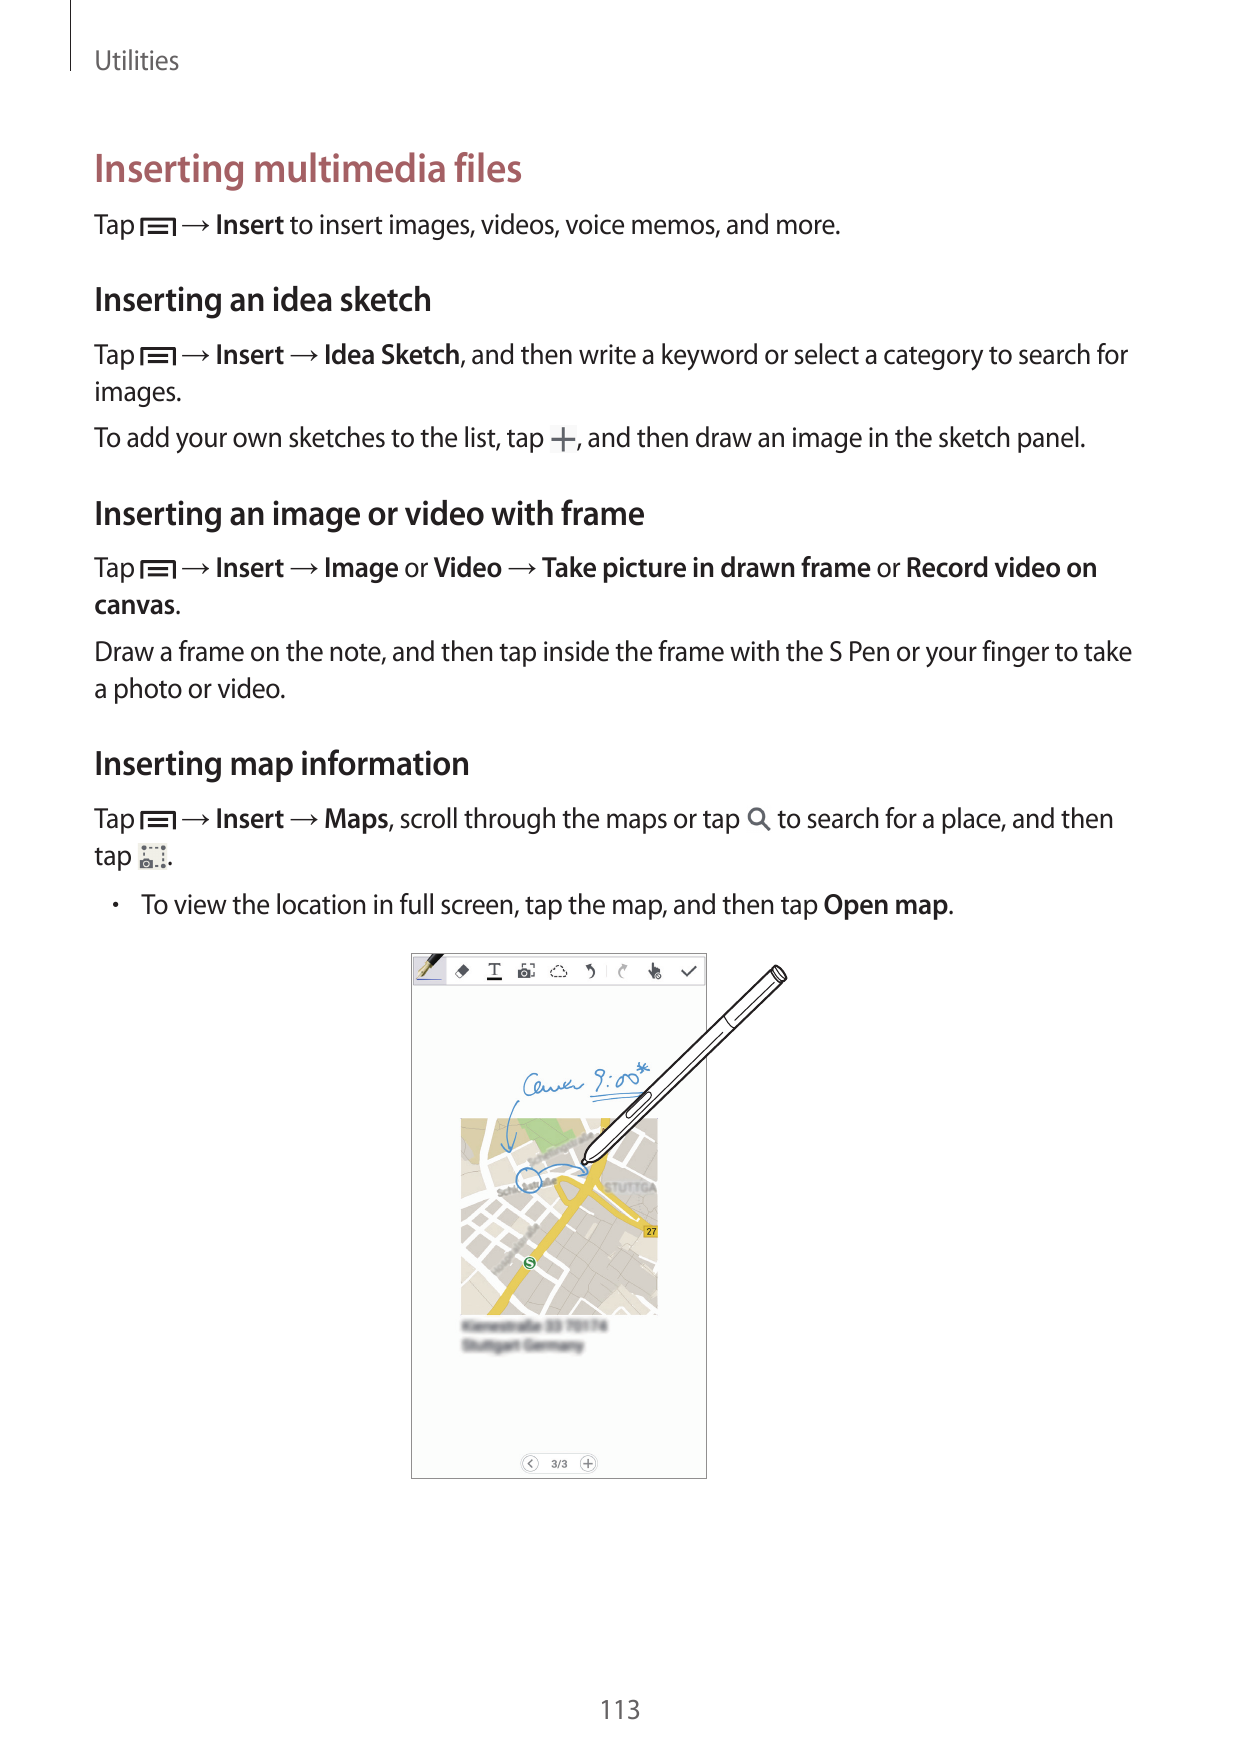 UtilitiesInserting multimedia files→ Insert to insert images, videos, voice memos, and more.TapInserting an idea sketch→ Insert 